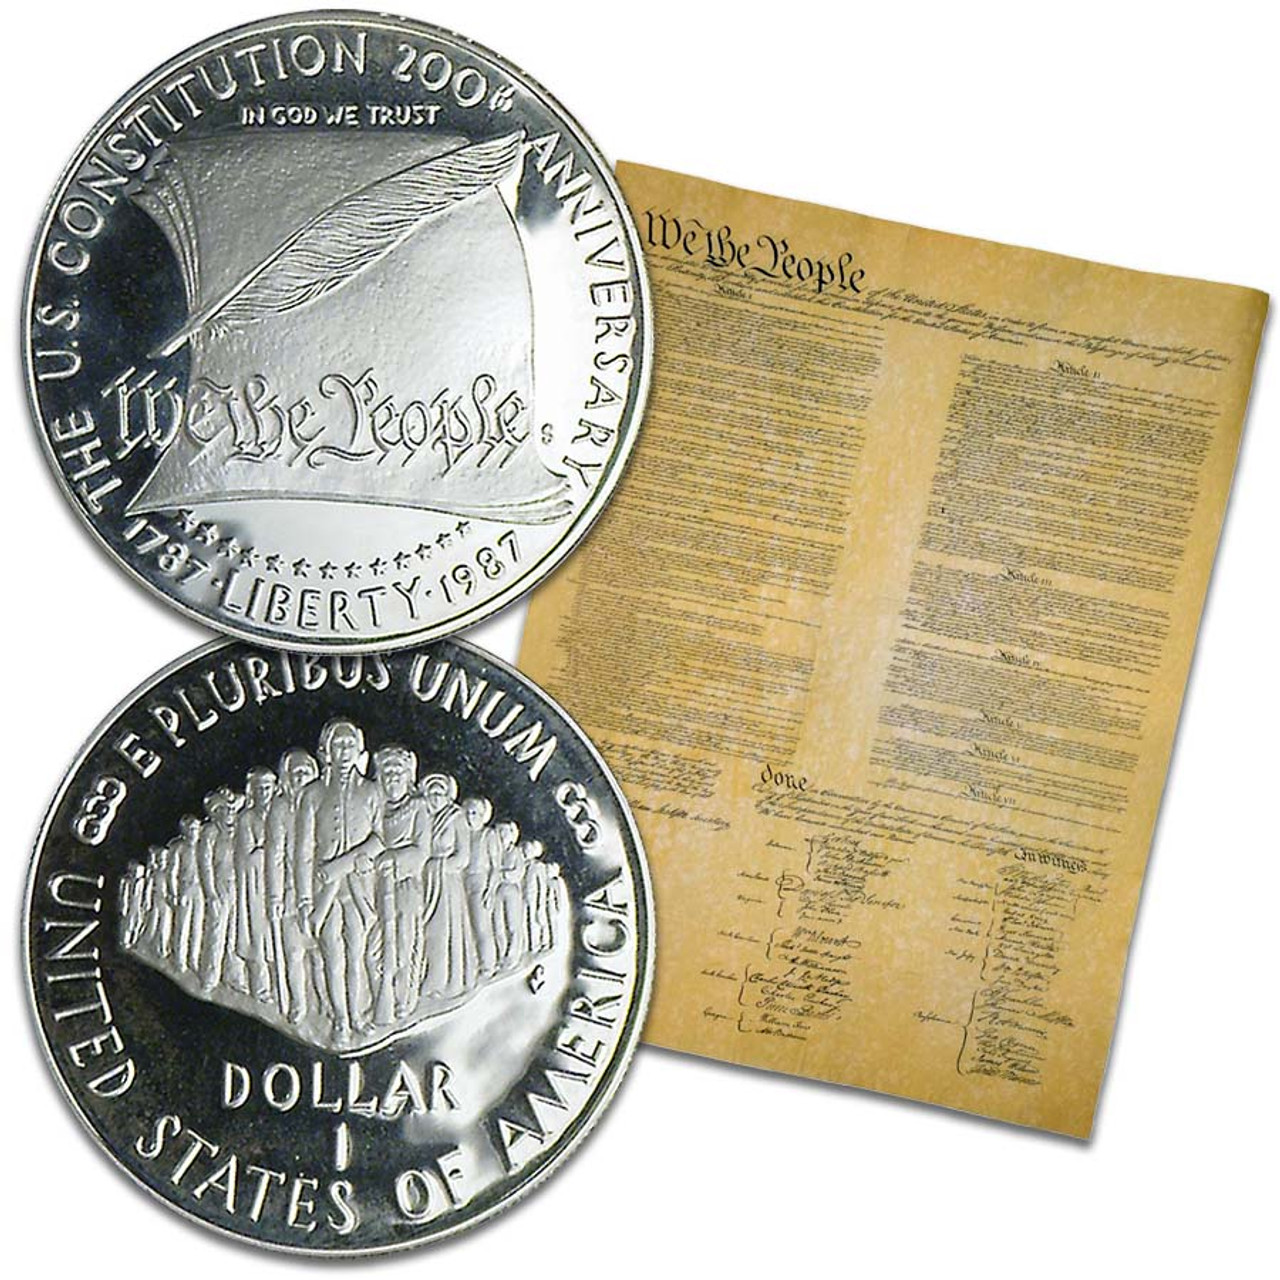 U.S. 1987-S Constitution Silver Dollar Proof with Free Document